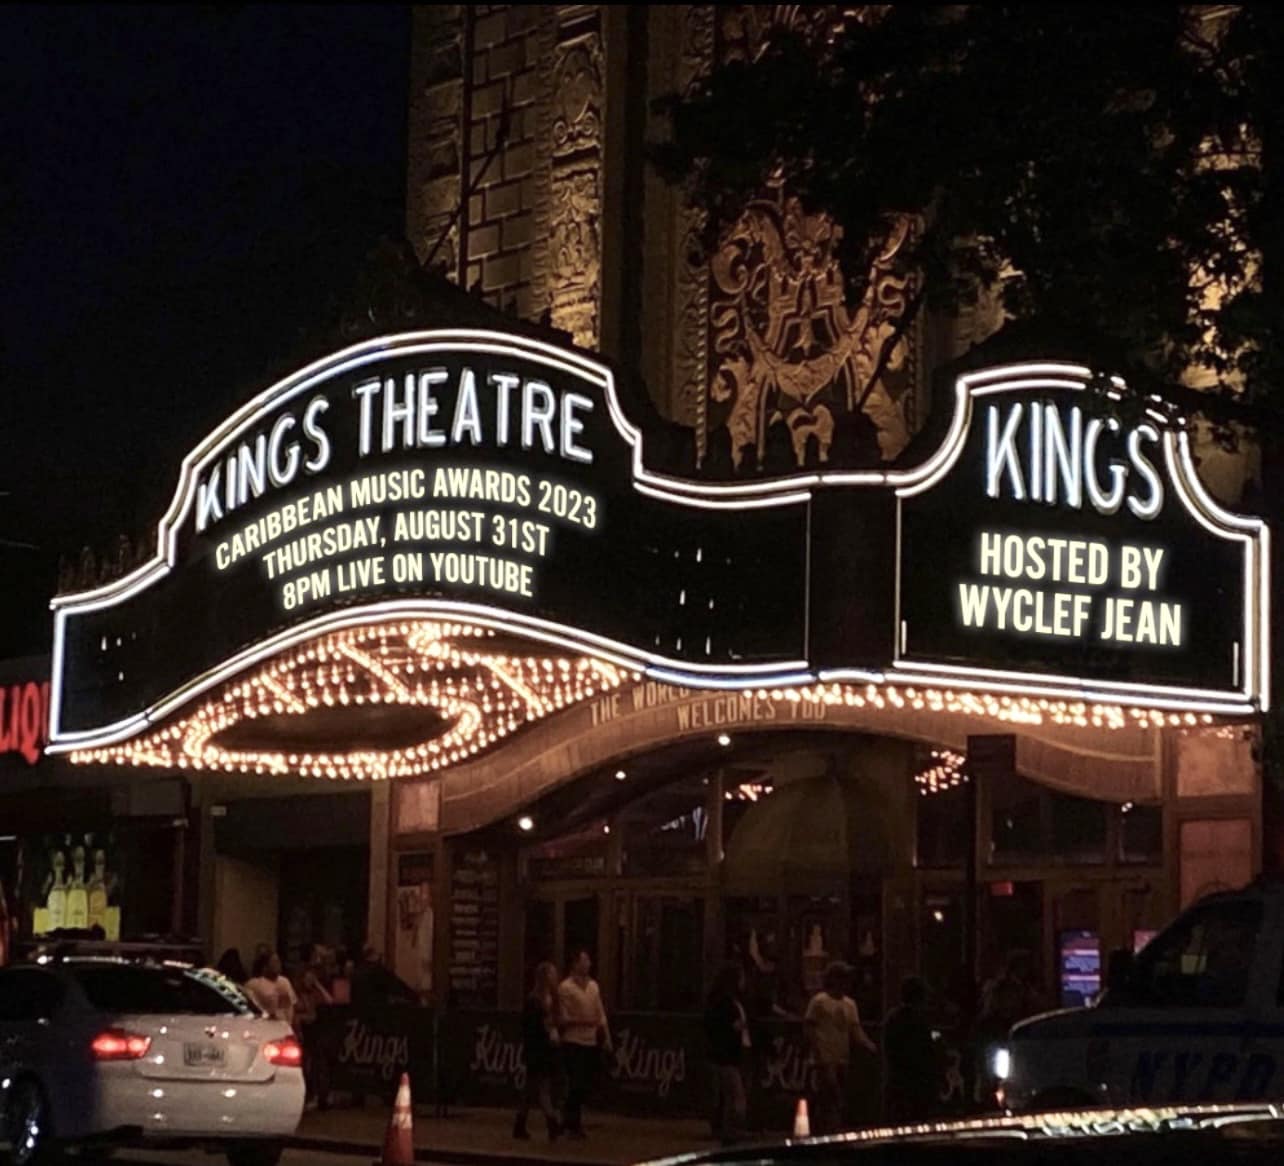 Kings Theater pic